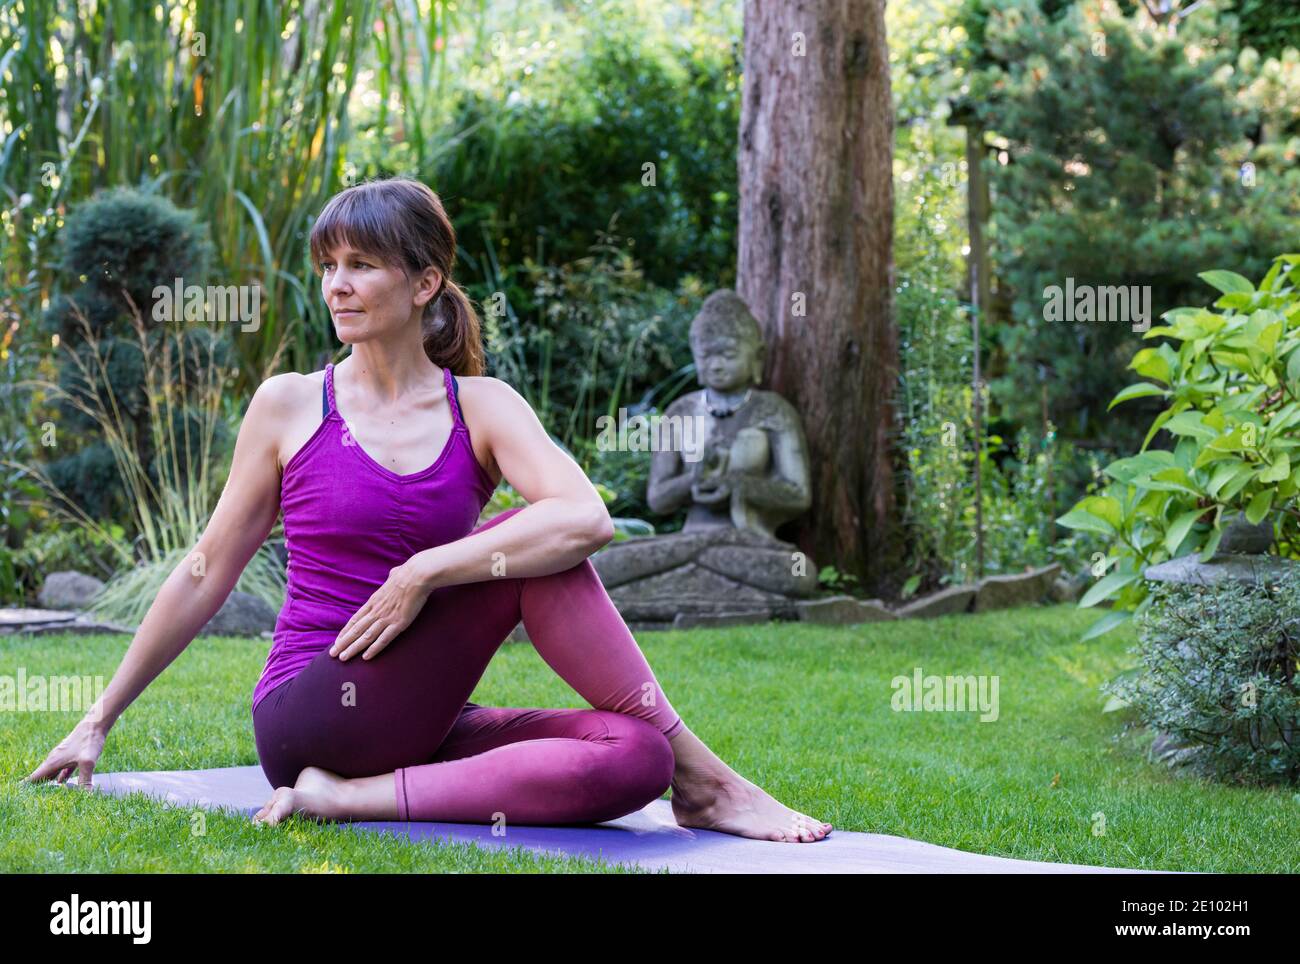 Woman doing yoga meditation watching online fitness session